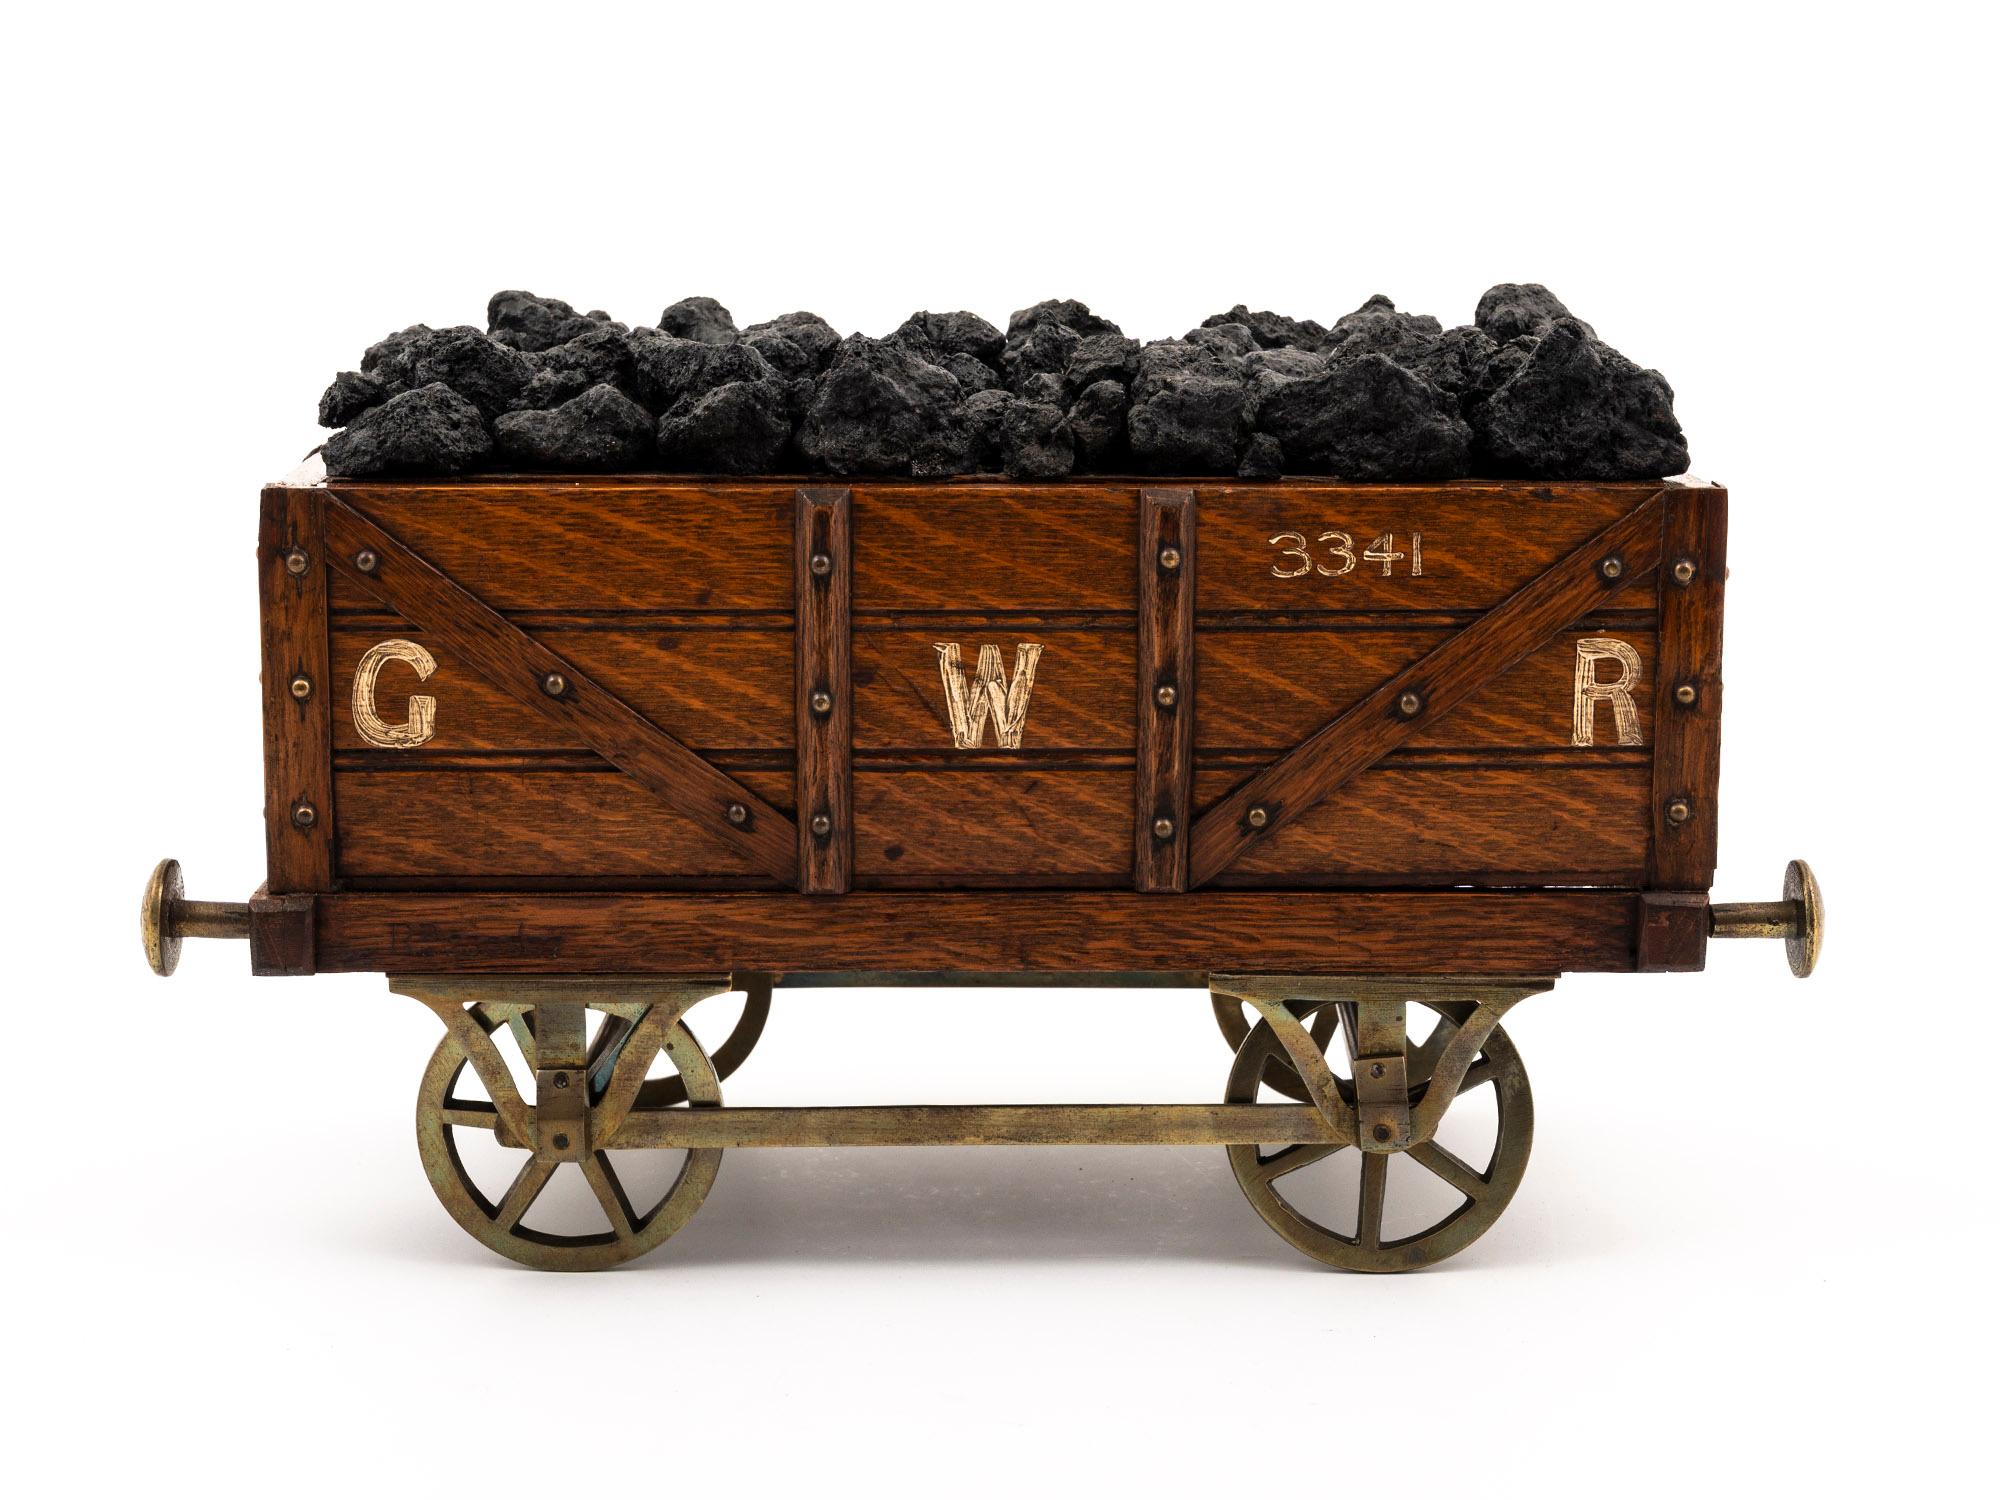 Realistically Formed 

From our Boxes collection, we are pleased to offer this novelty Great Western Railway Bogie Coal Wagon Humidor. The humidor carved in oak modelled as a novelty railway bogie wagon carrying coal with working brass wheels,